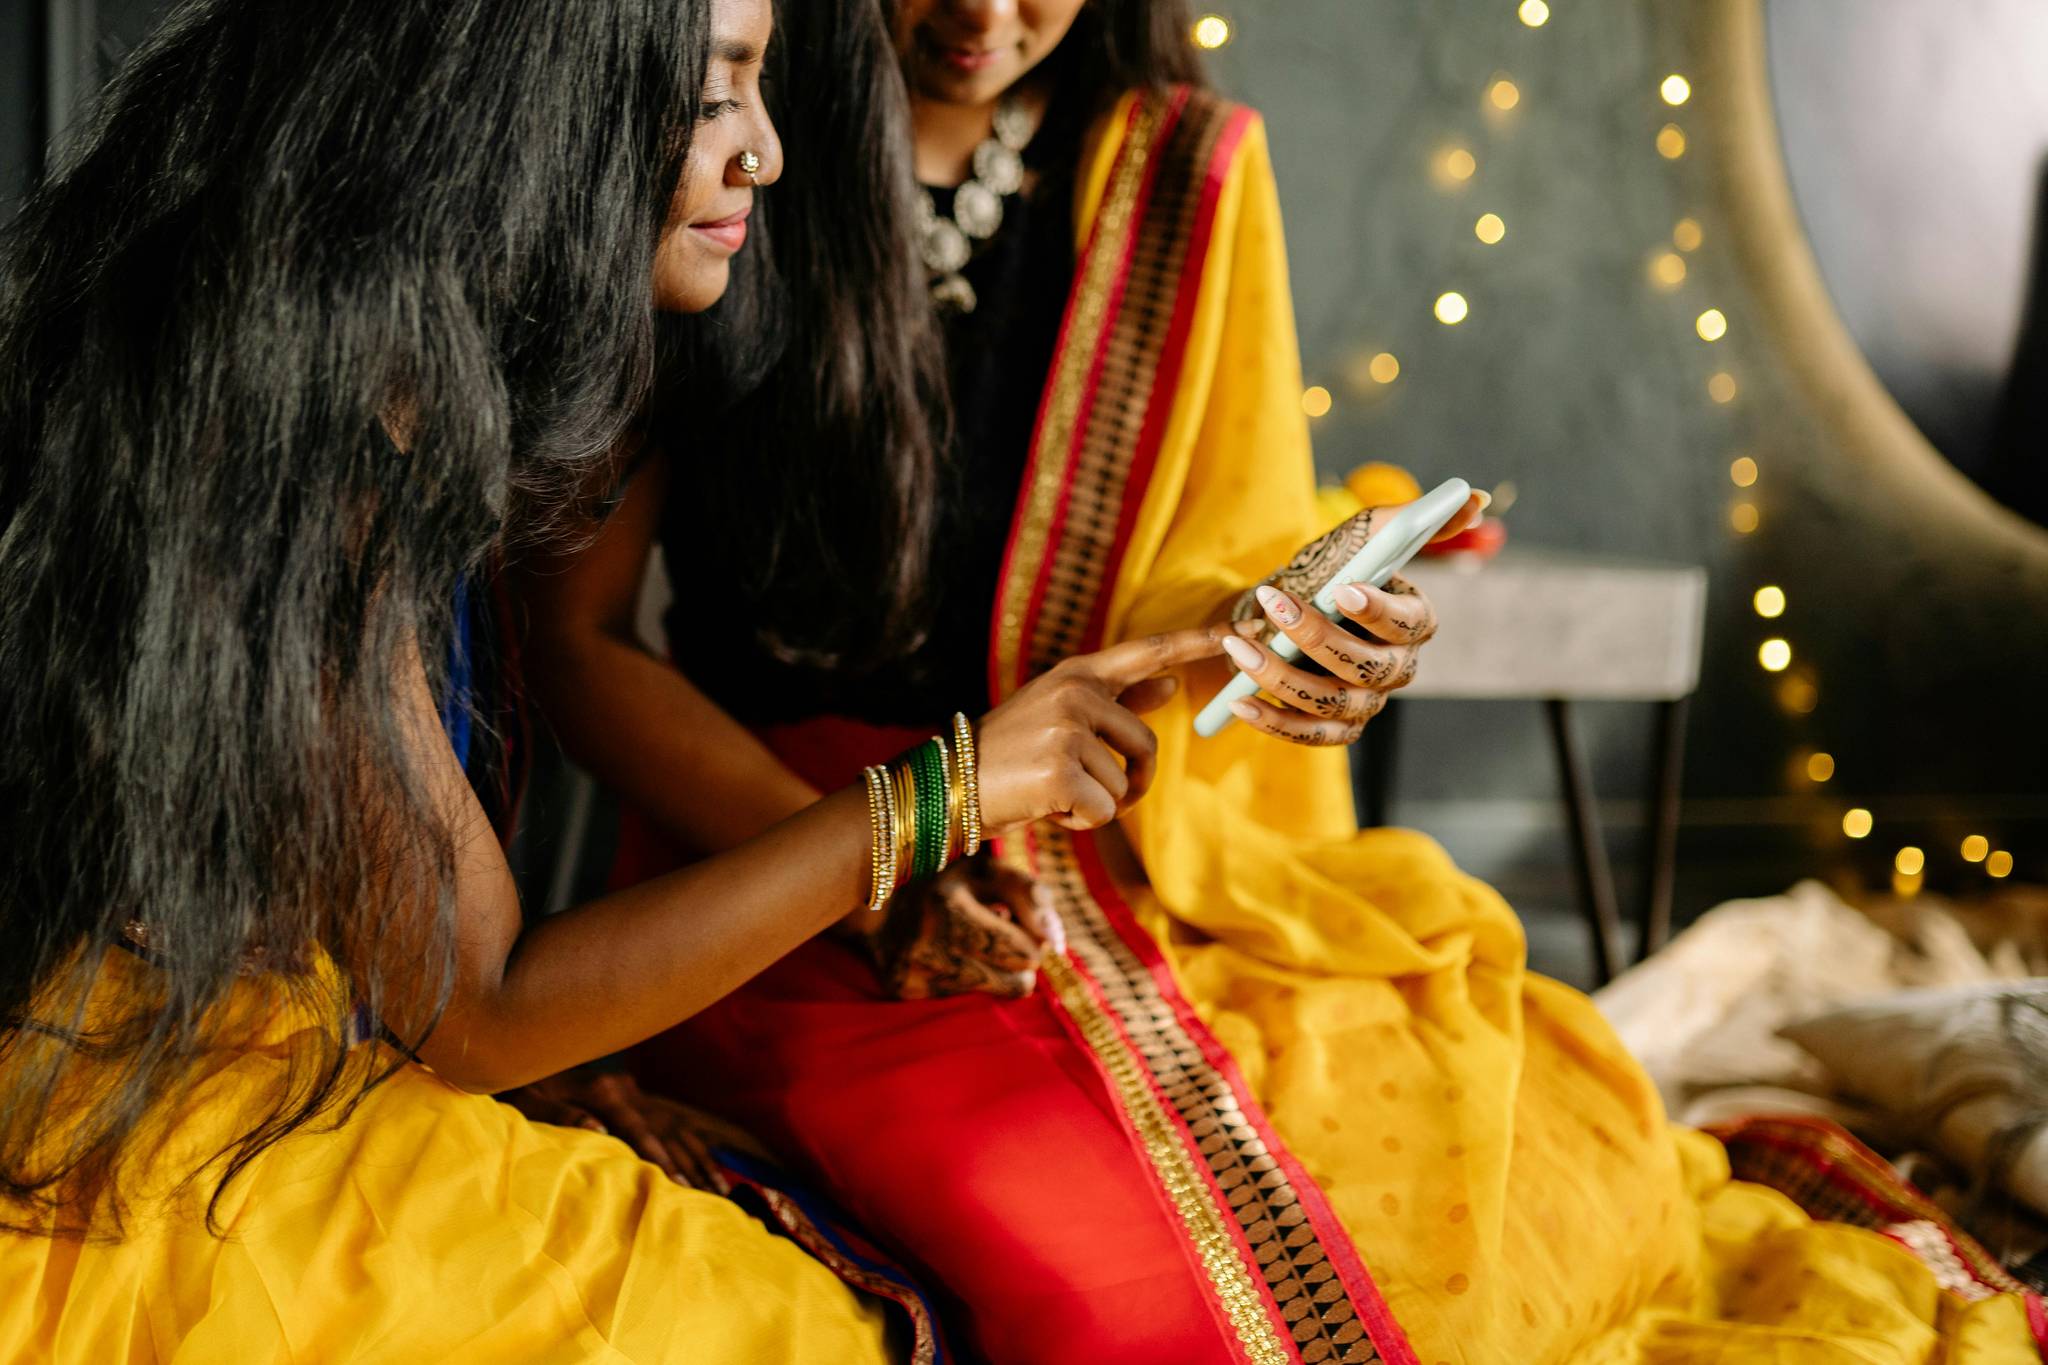 How is social shopping changing the way Indians spend on Diwali?